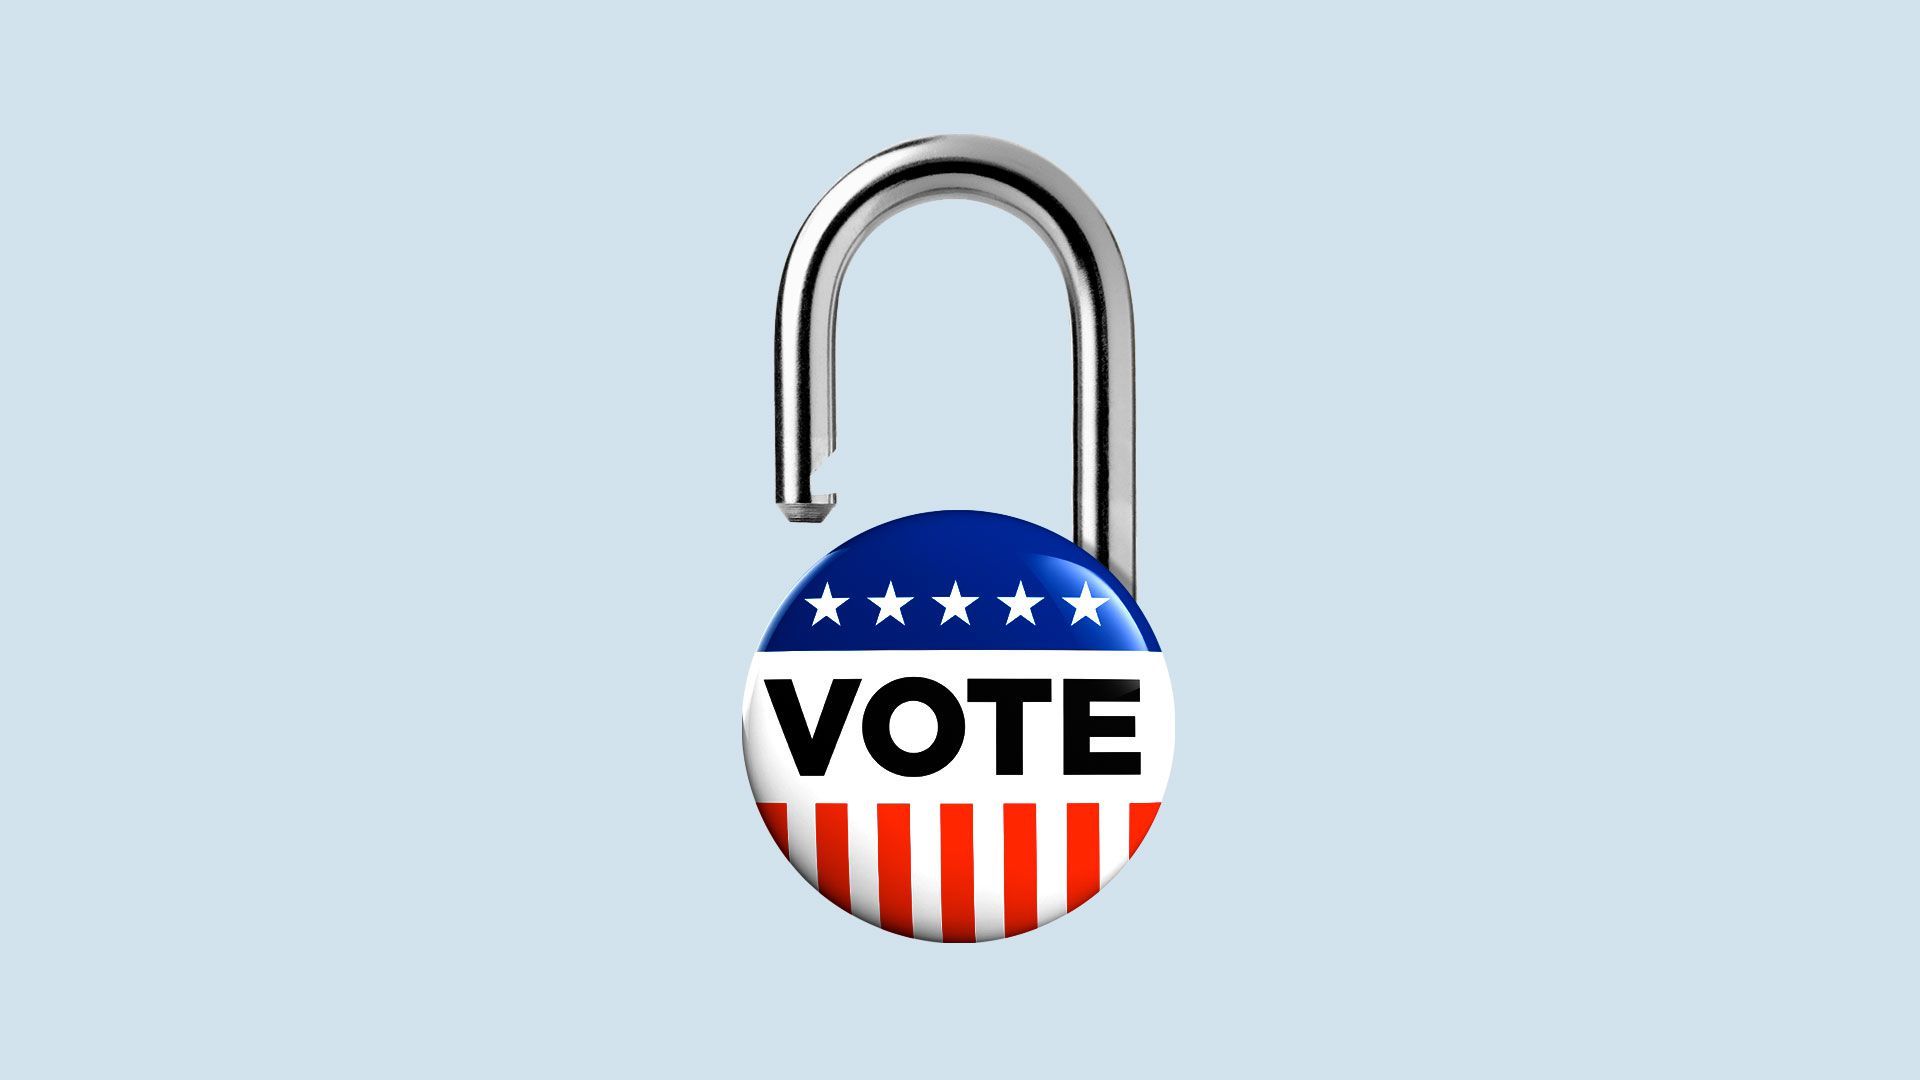 Illustration of a campaign vote button with an opened padlock shackle on the top.